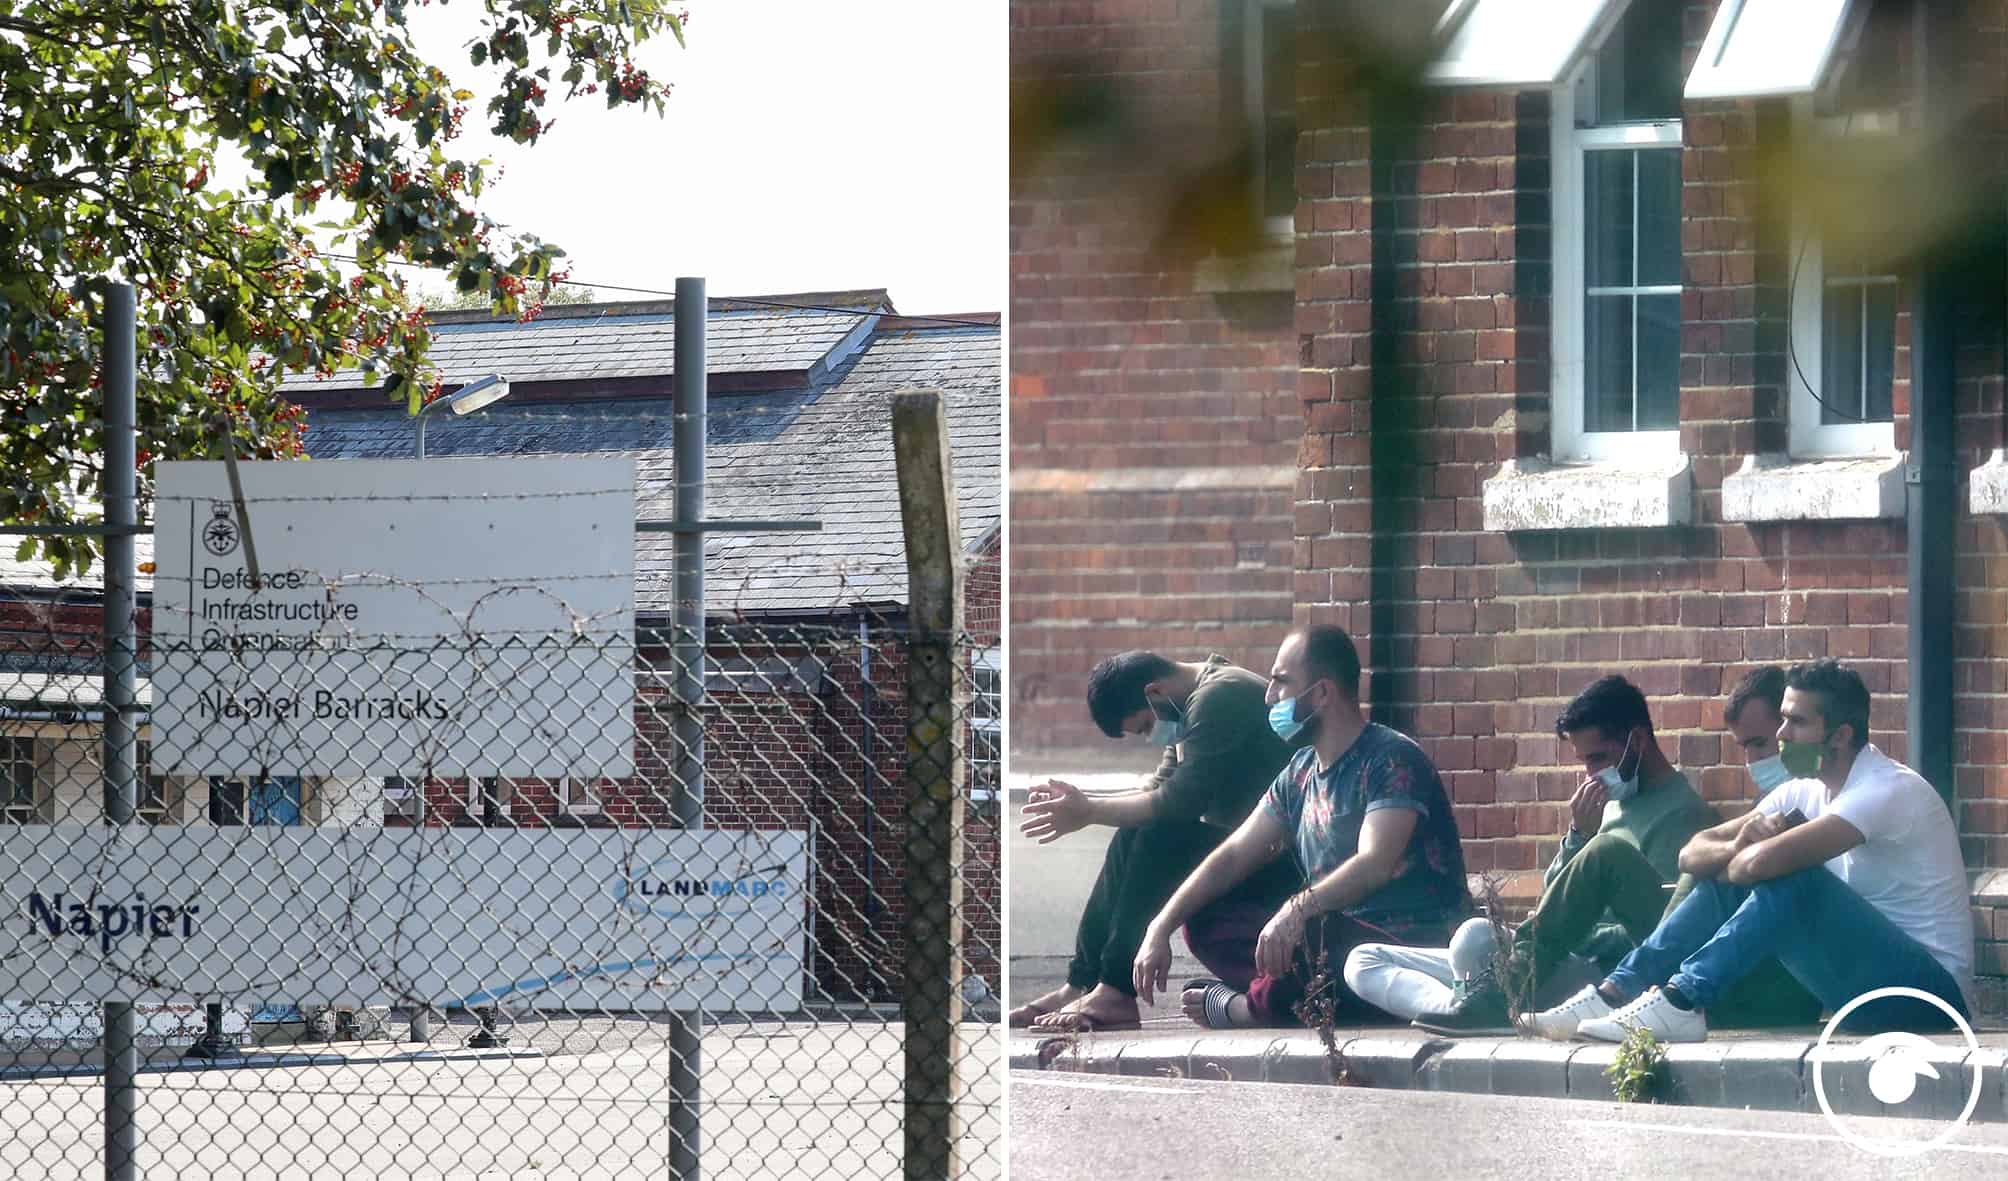 ‘I’m really struggling mentally’ – Asylum seeker describes ‘unbearable’ conditions at military barracks